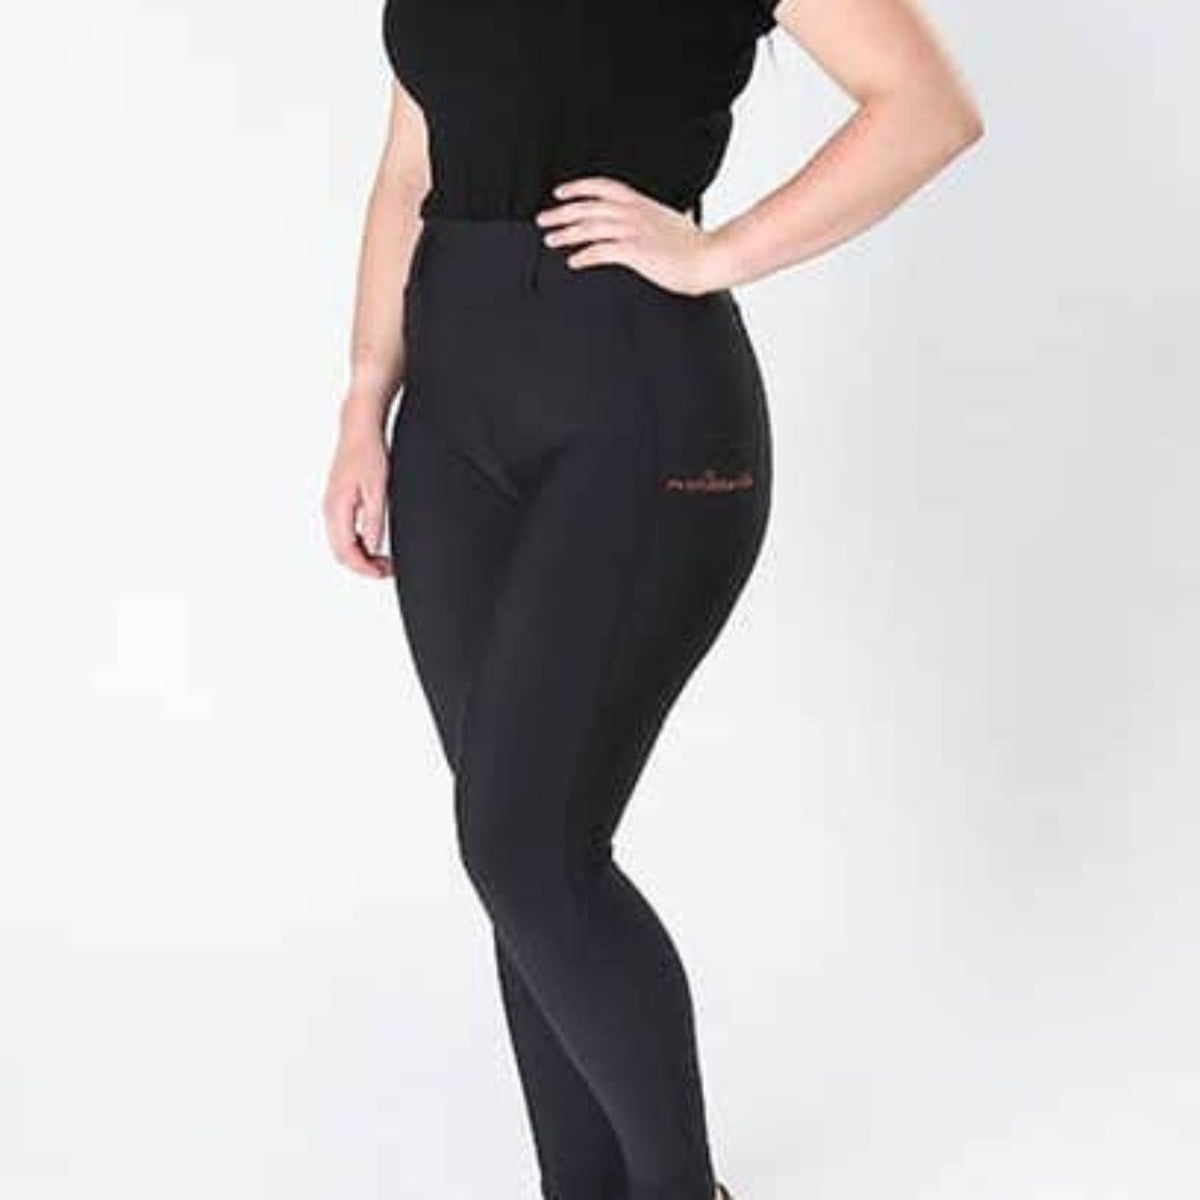 Side view of black riding tights with Performa Ride logo on pocket.